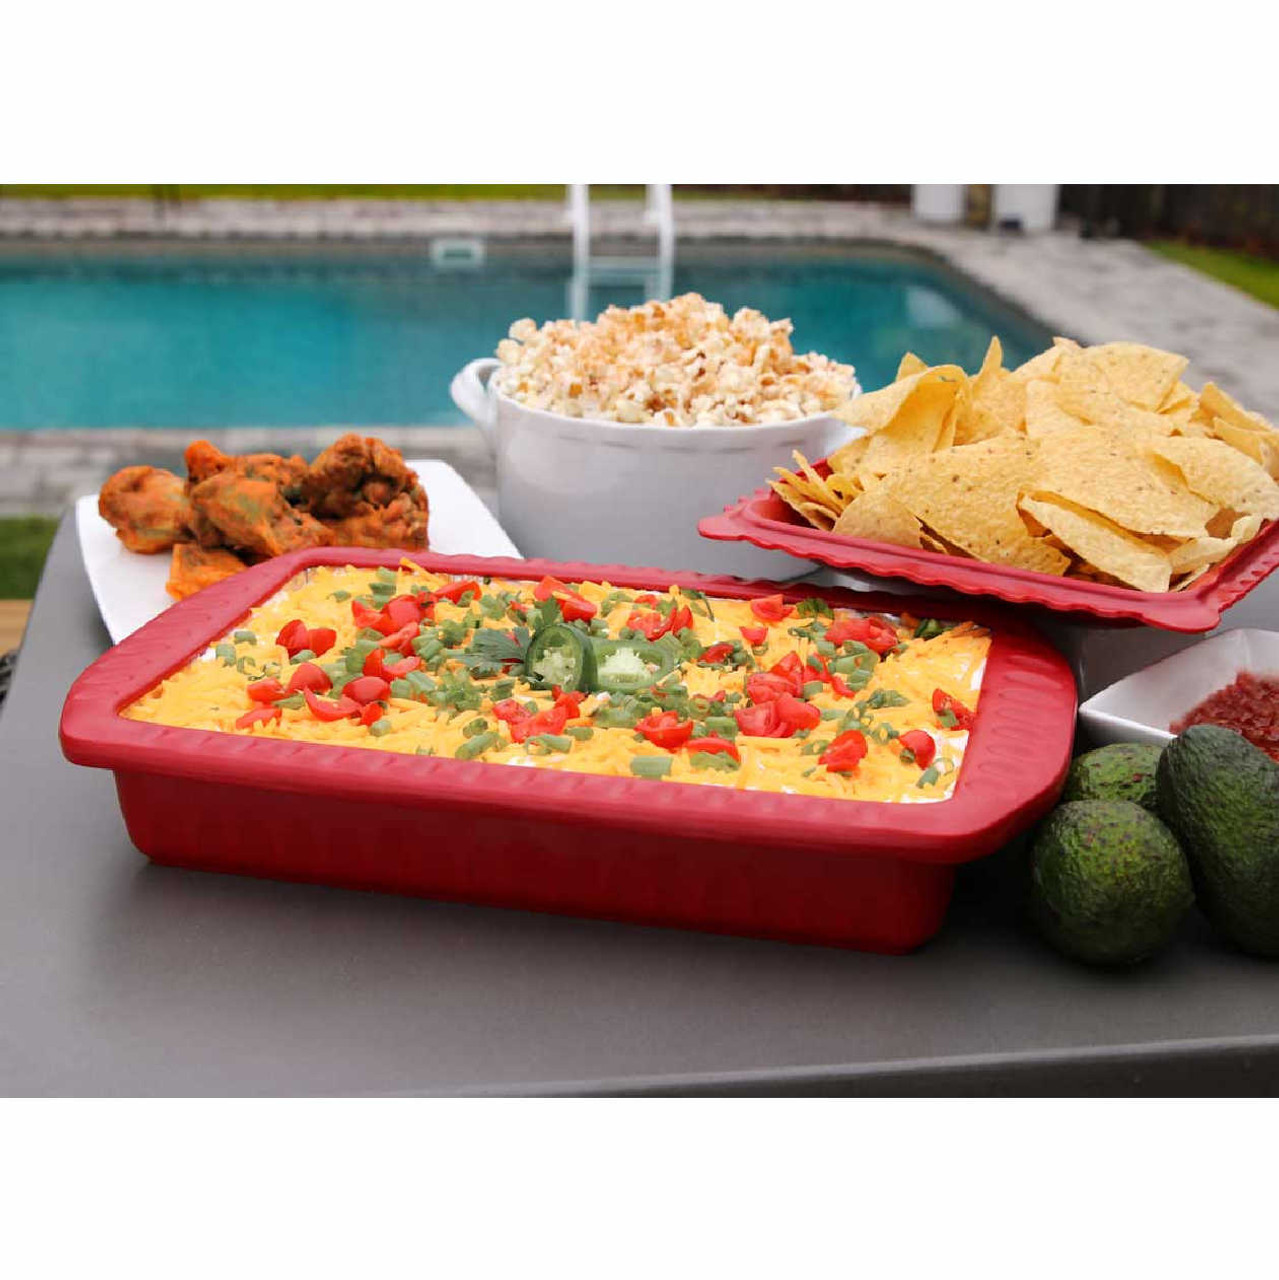 https://cdn11.bigcommerce.com/s-hccytny0od/images/stencil/1280x1280/products/5259/22762/Foil_Decor_Casserole_Carrier_Red_2__84636.1676335947.jpg?c=2?imbypass=on